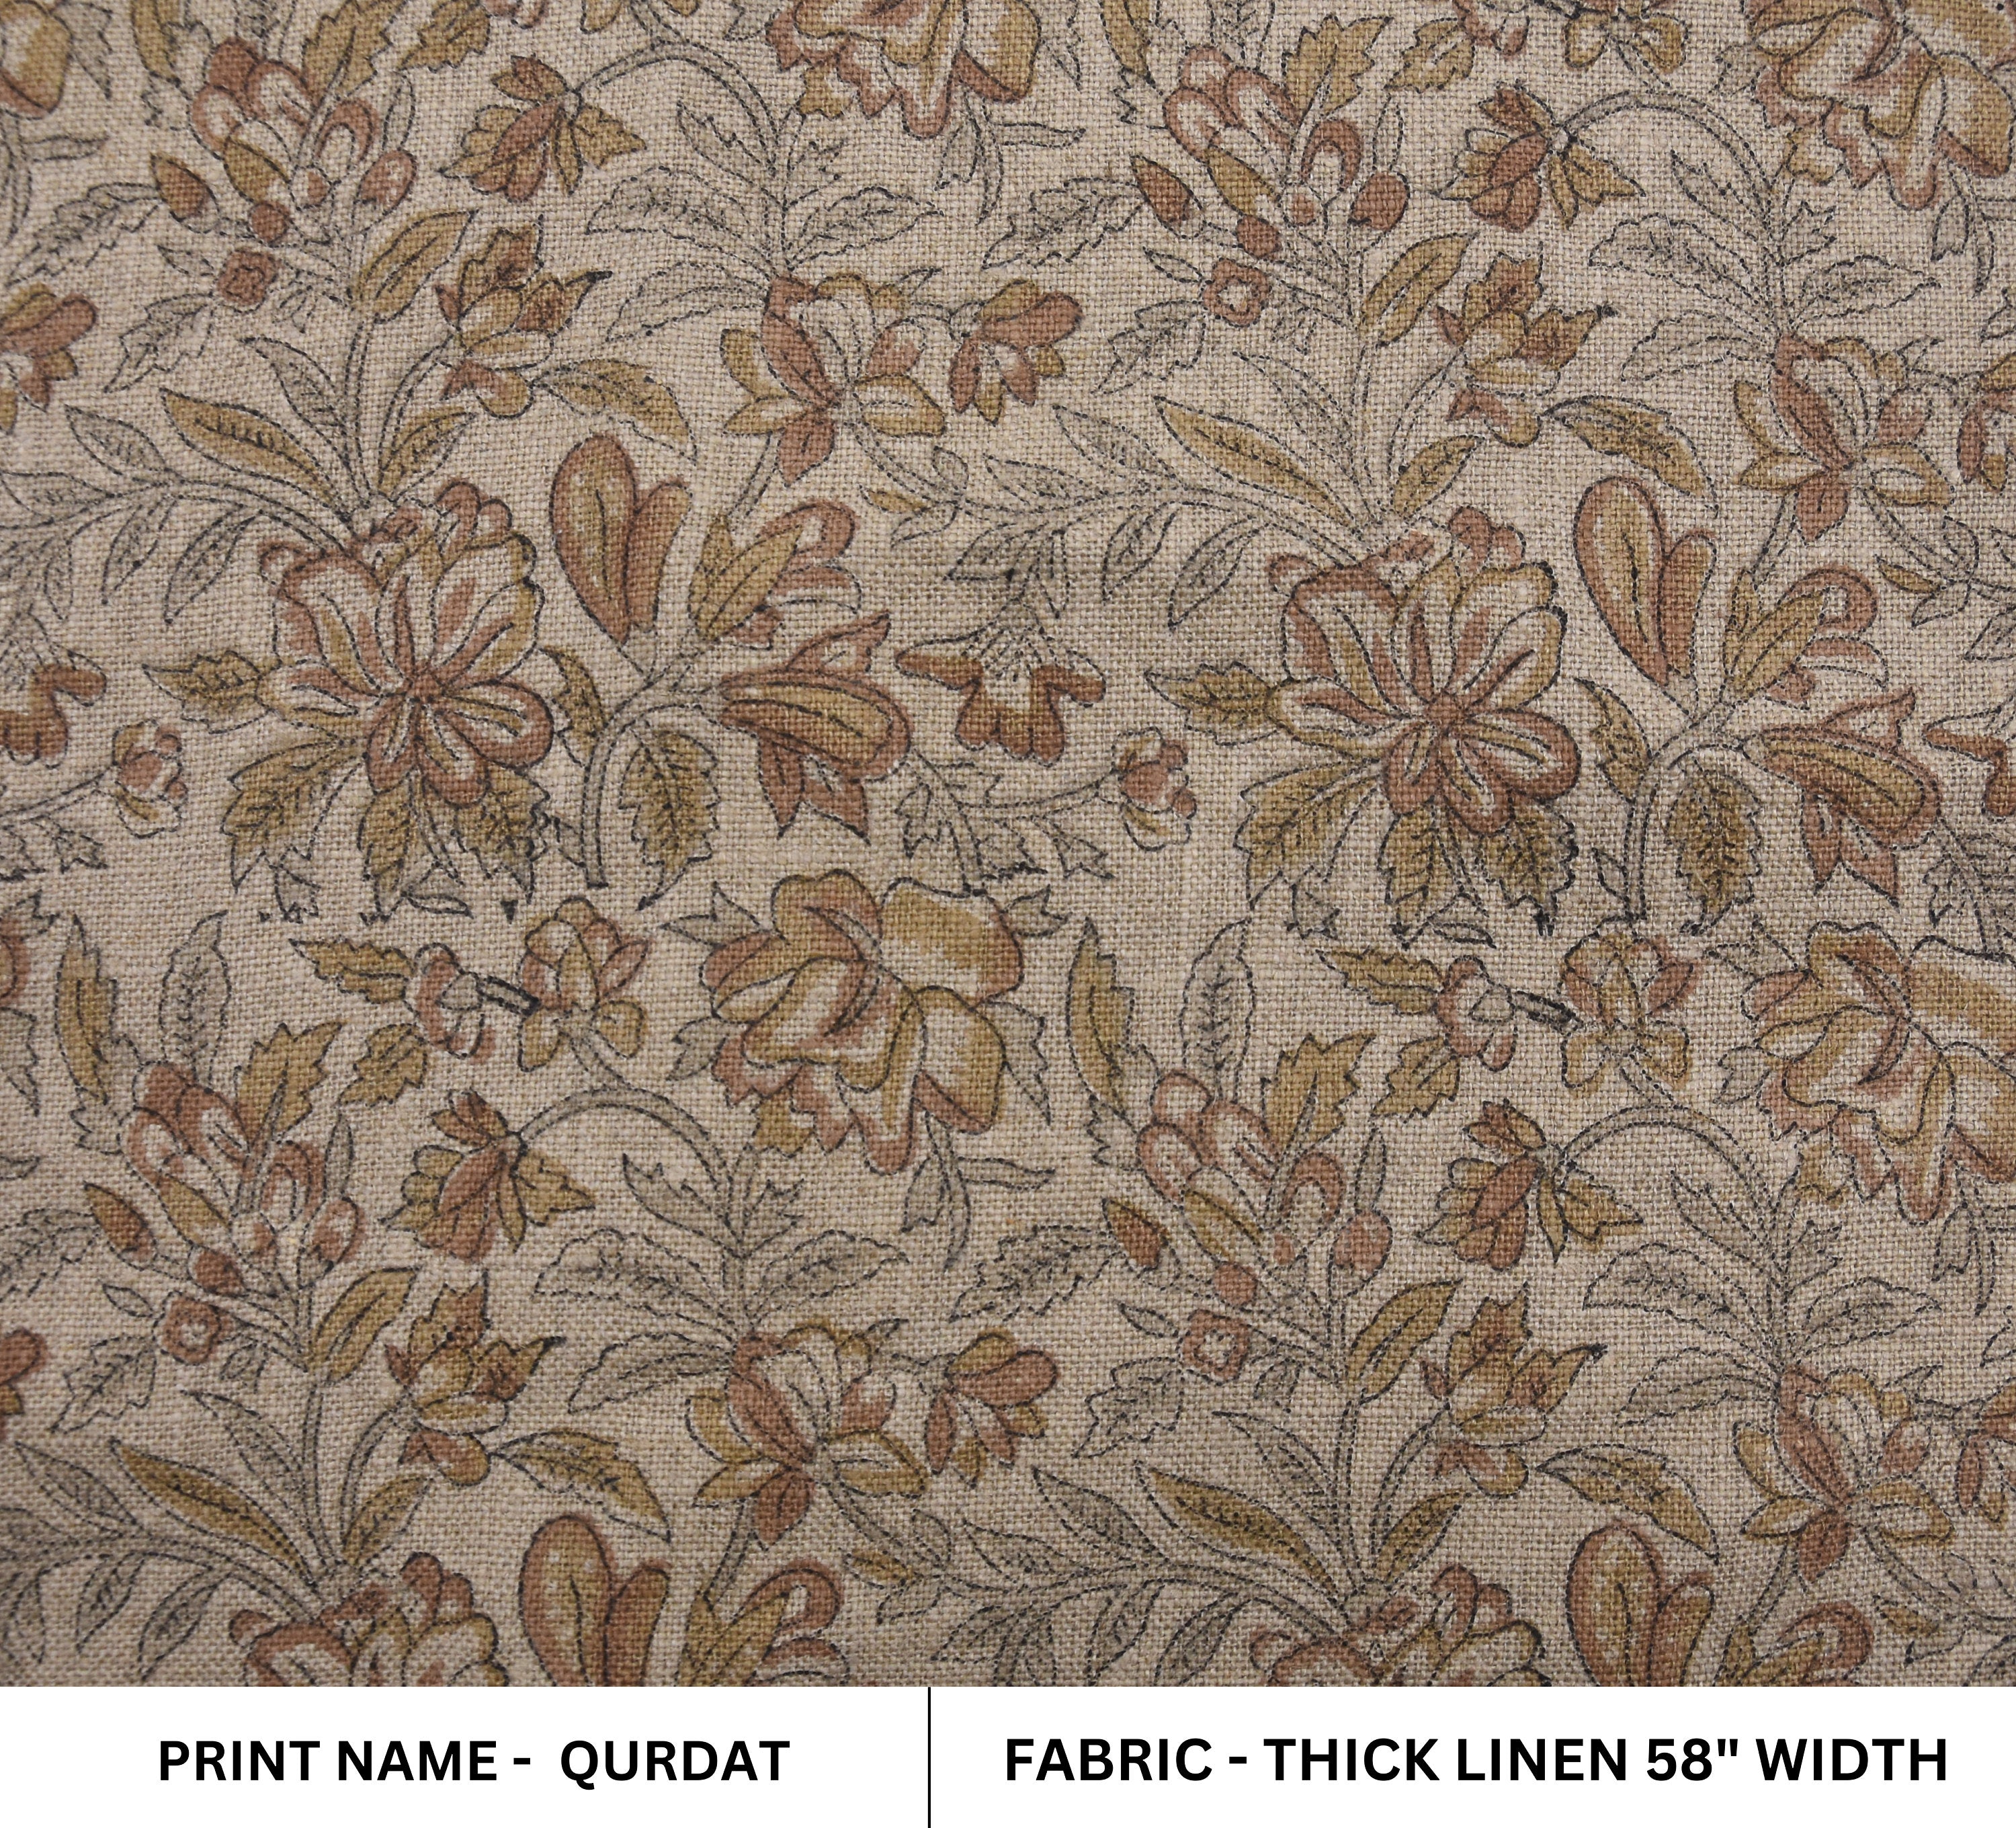 Hand block Thick Linen 58" Wide, Linen the Yard, Floral Fabric by The Yard, Upholstery Cushion Cover Fabric - QUDRAT